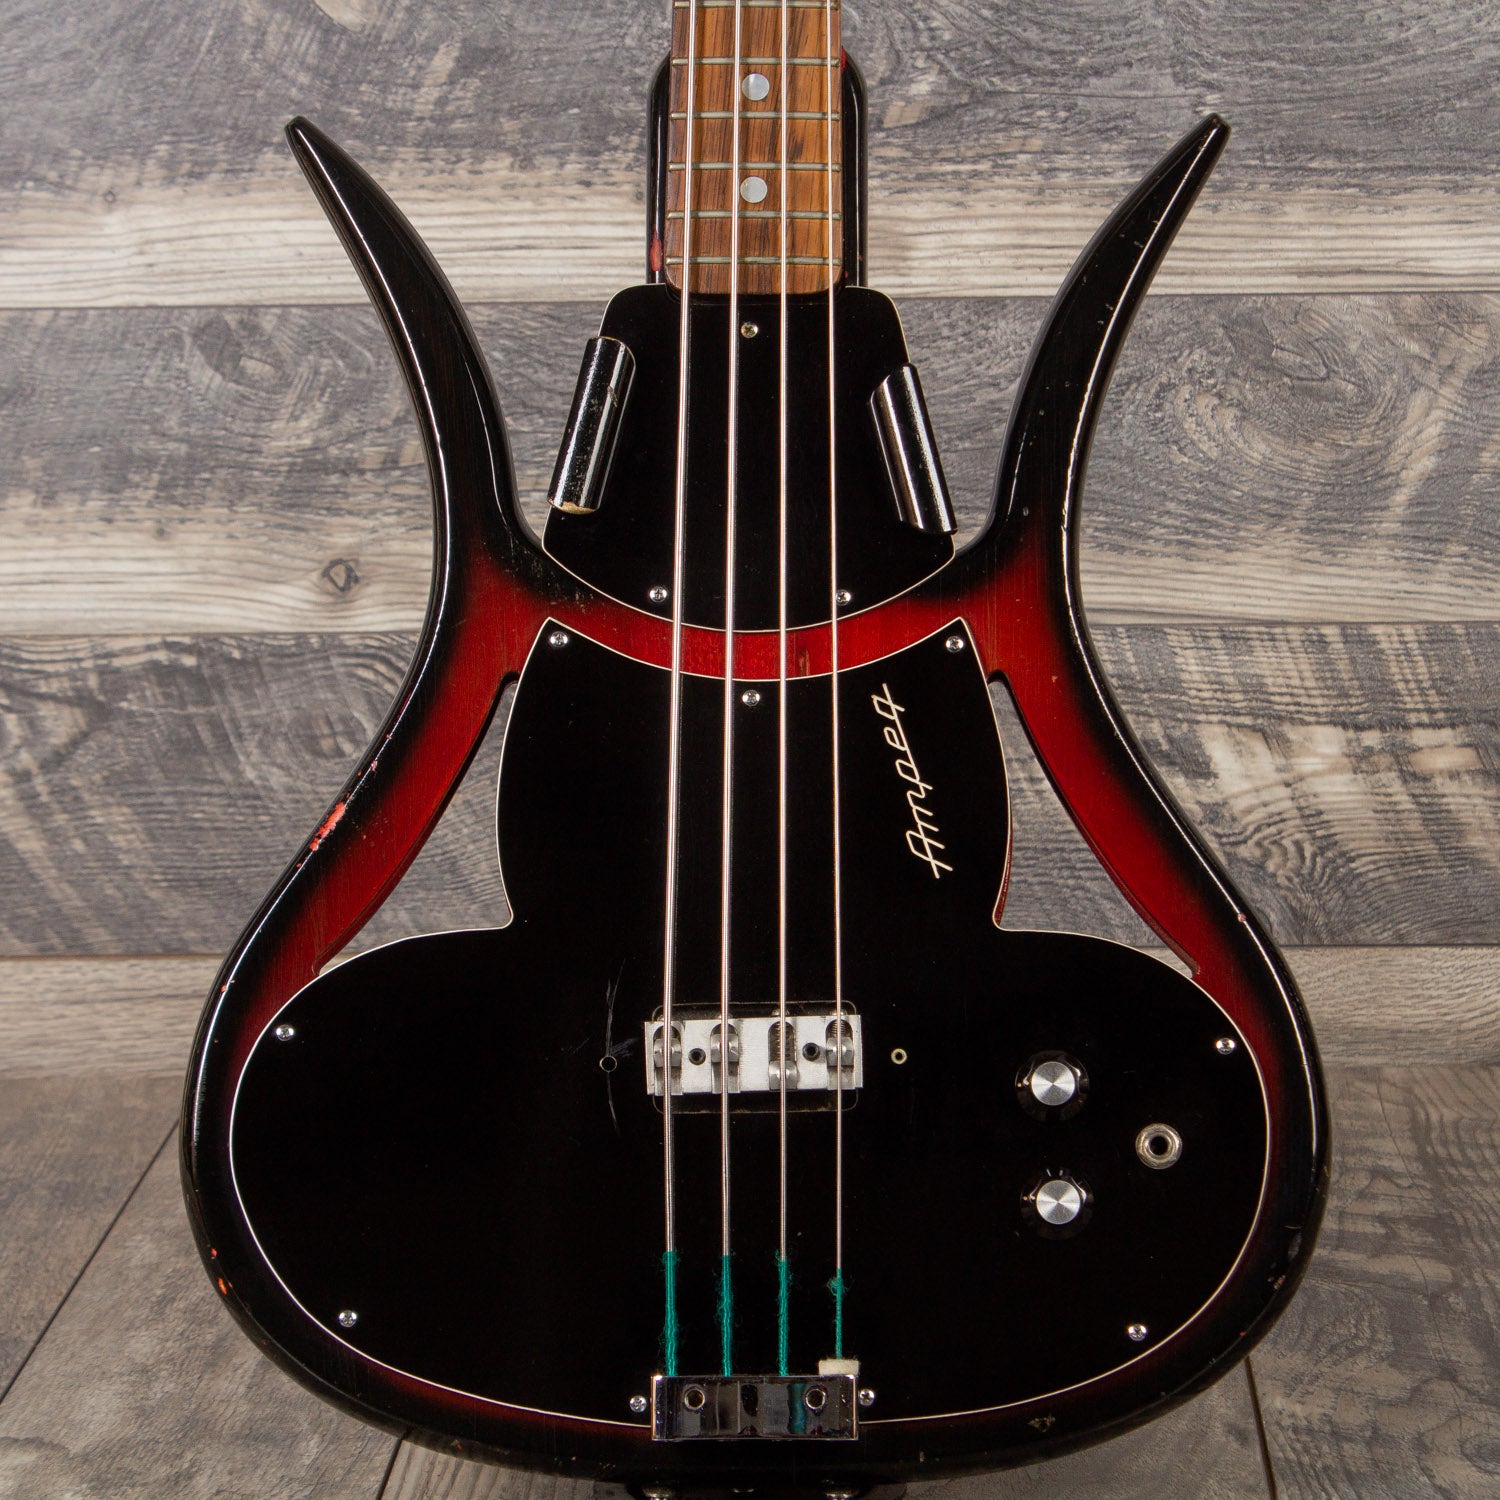 Previously Owned Bass Guitars